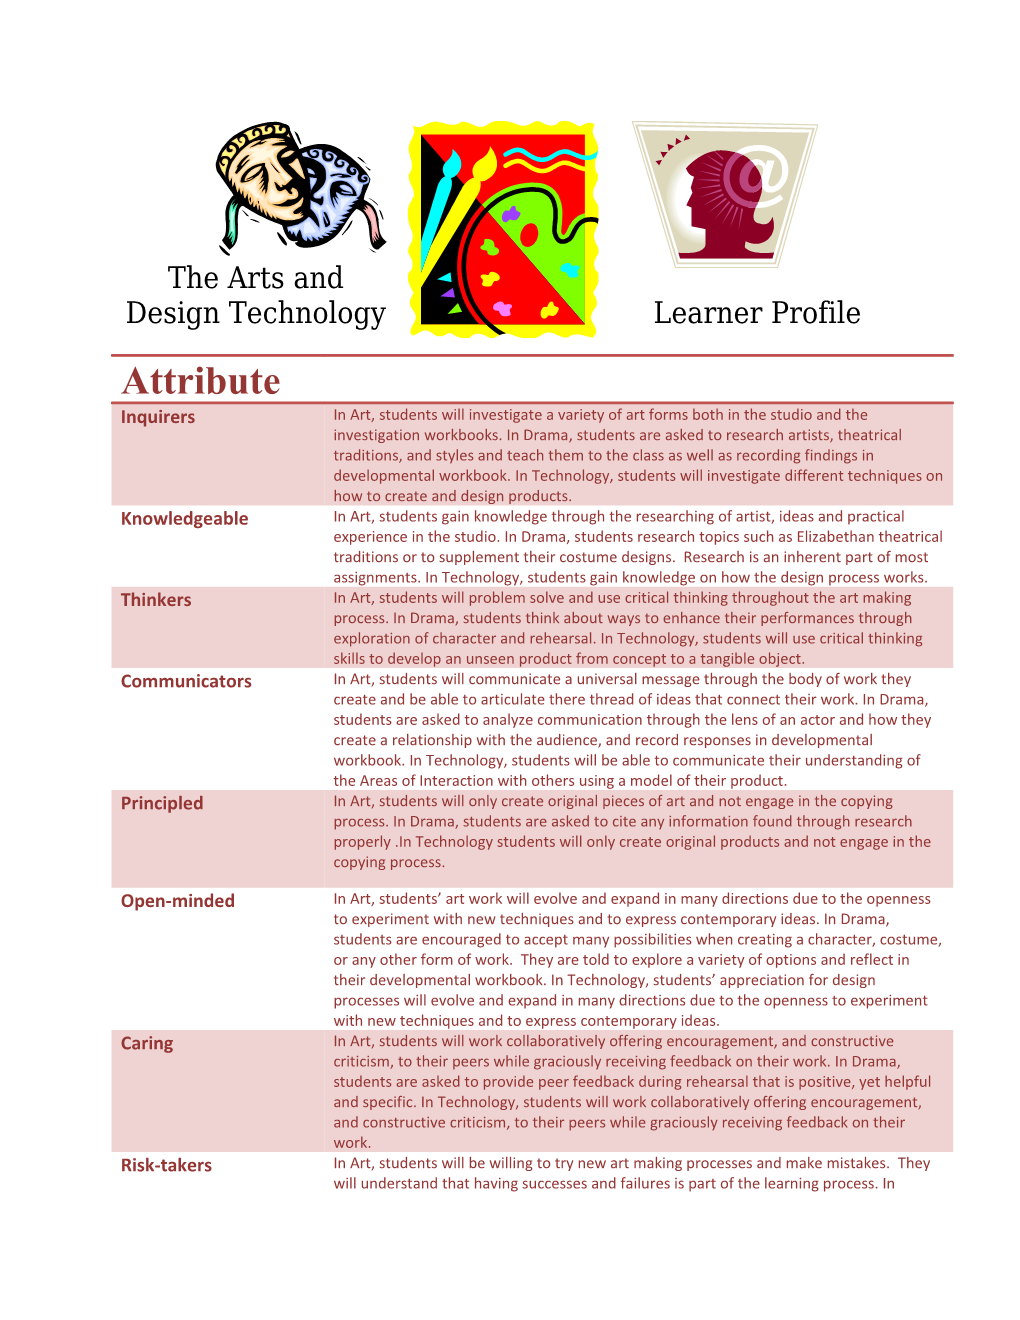 The Arts and Design Technology Learner Profile